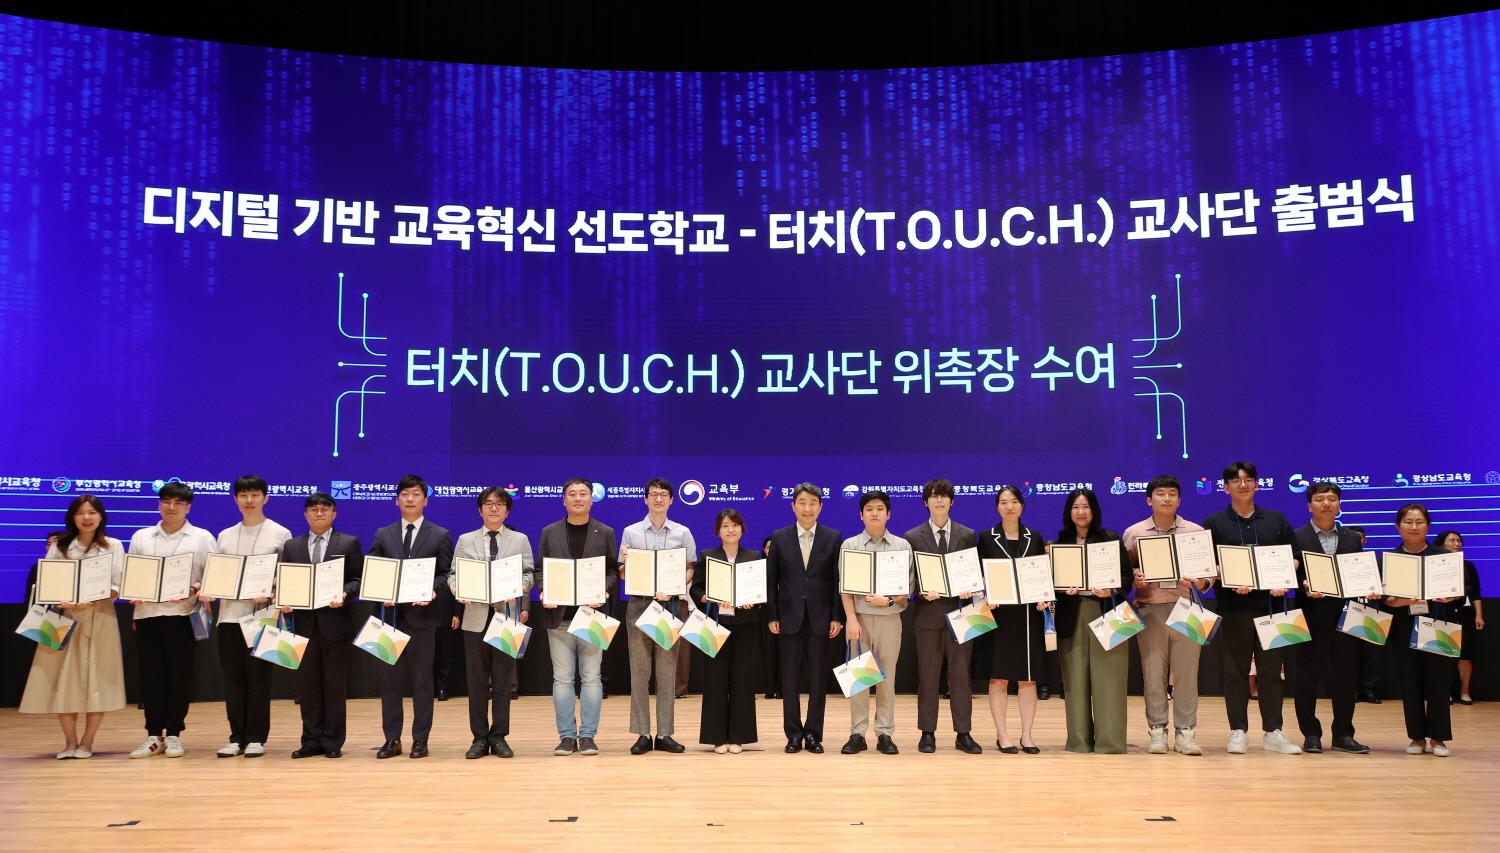 Digital Beacon Schools and TOUCH Teacher Corps Launched (2)